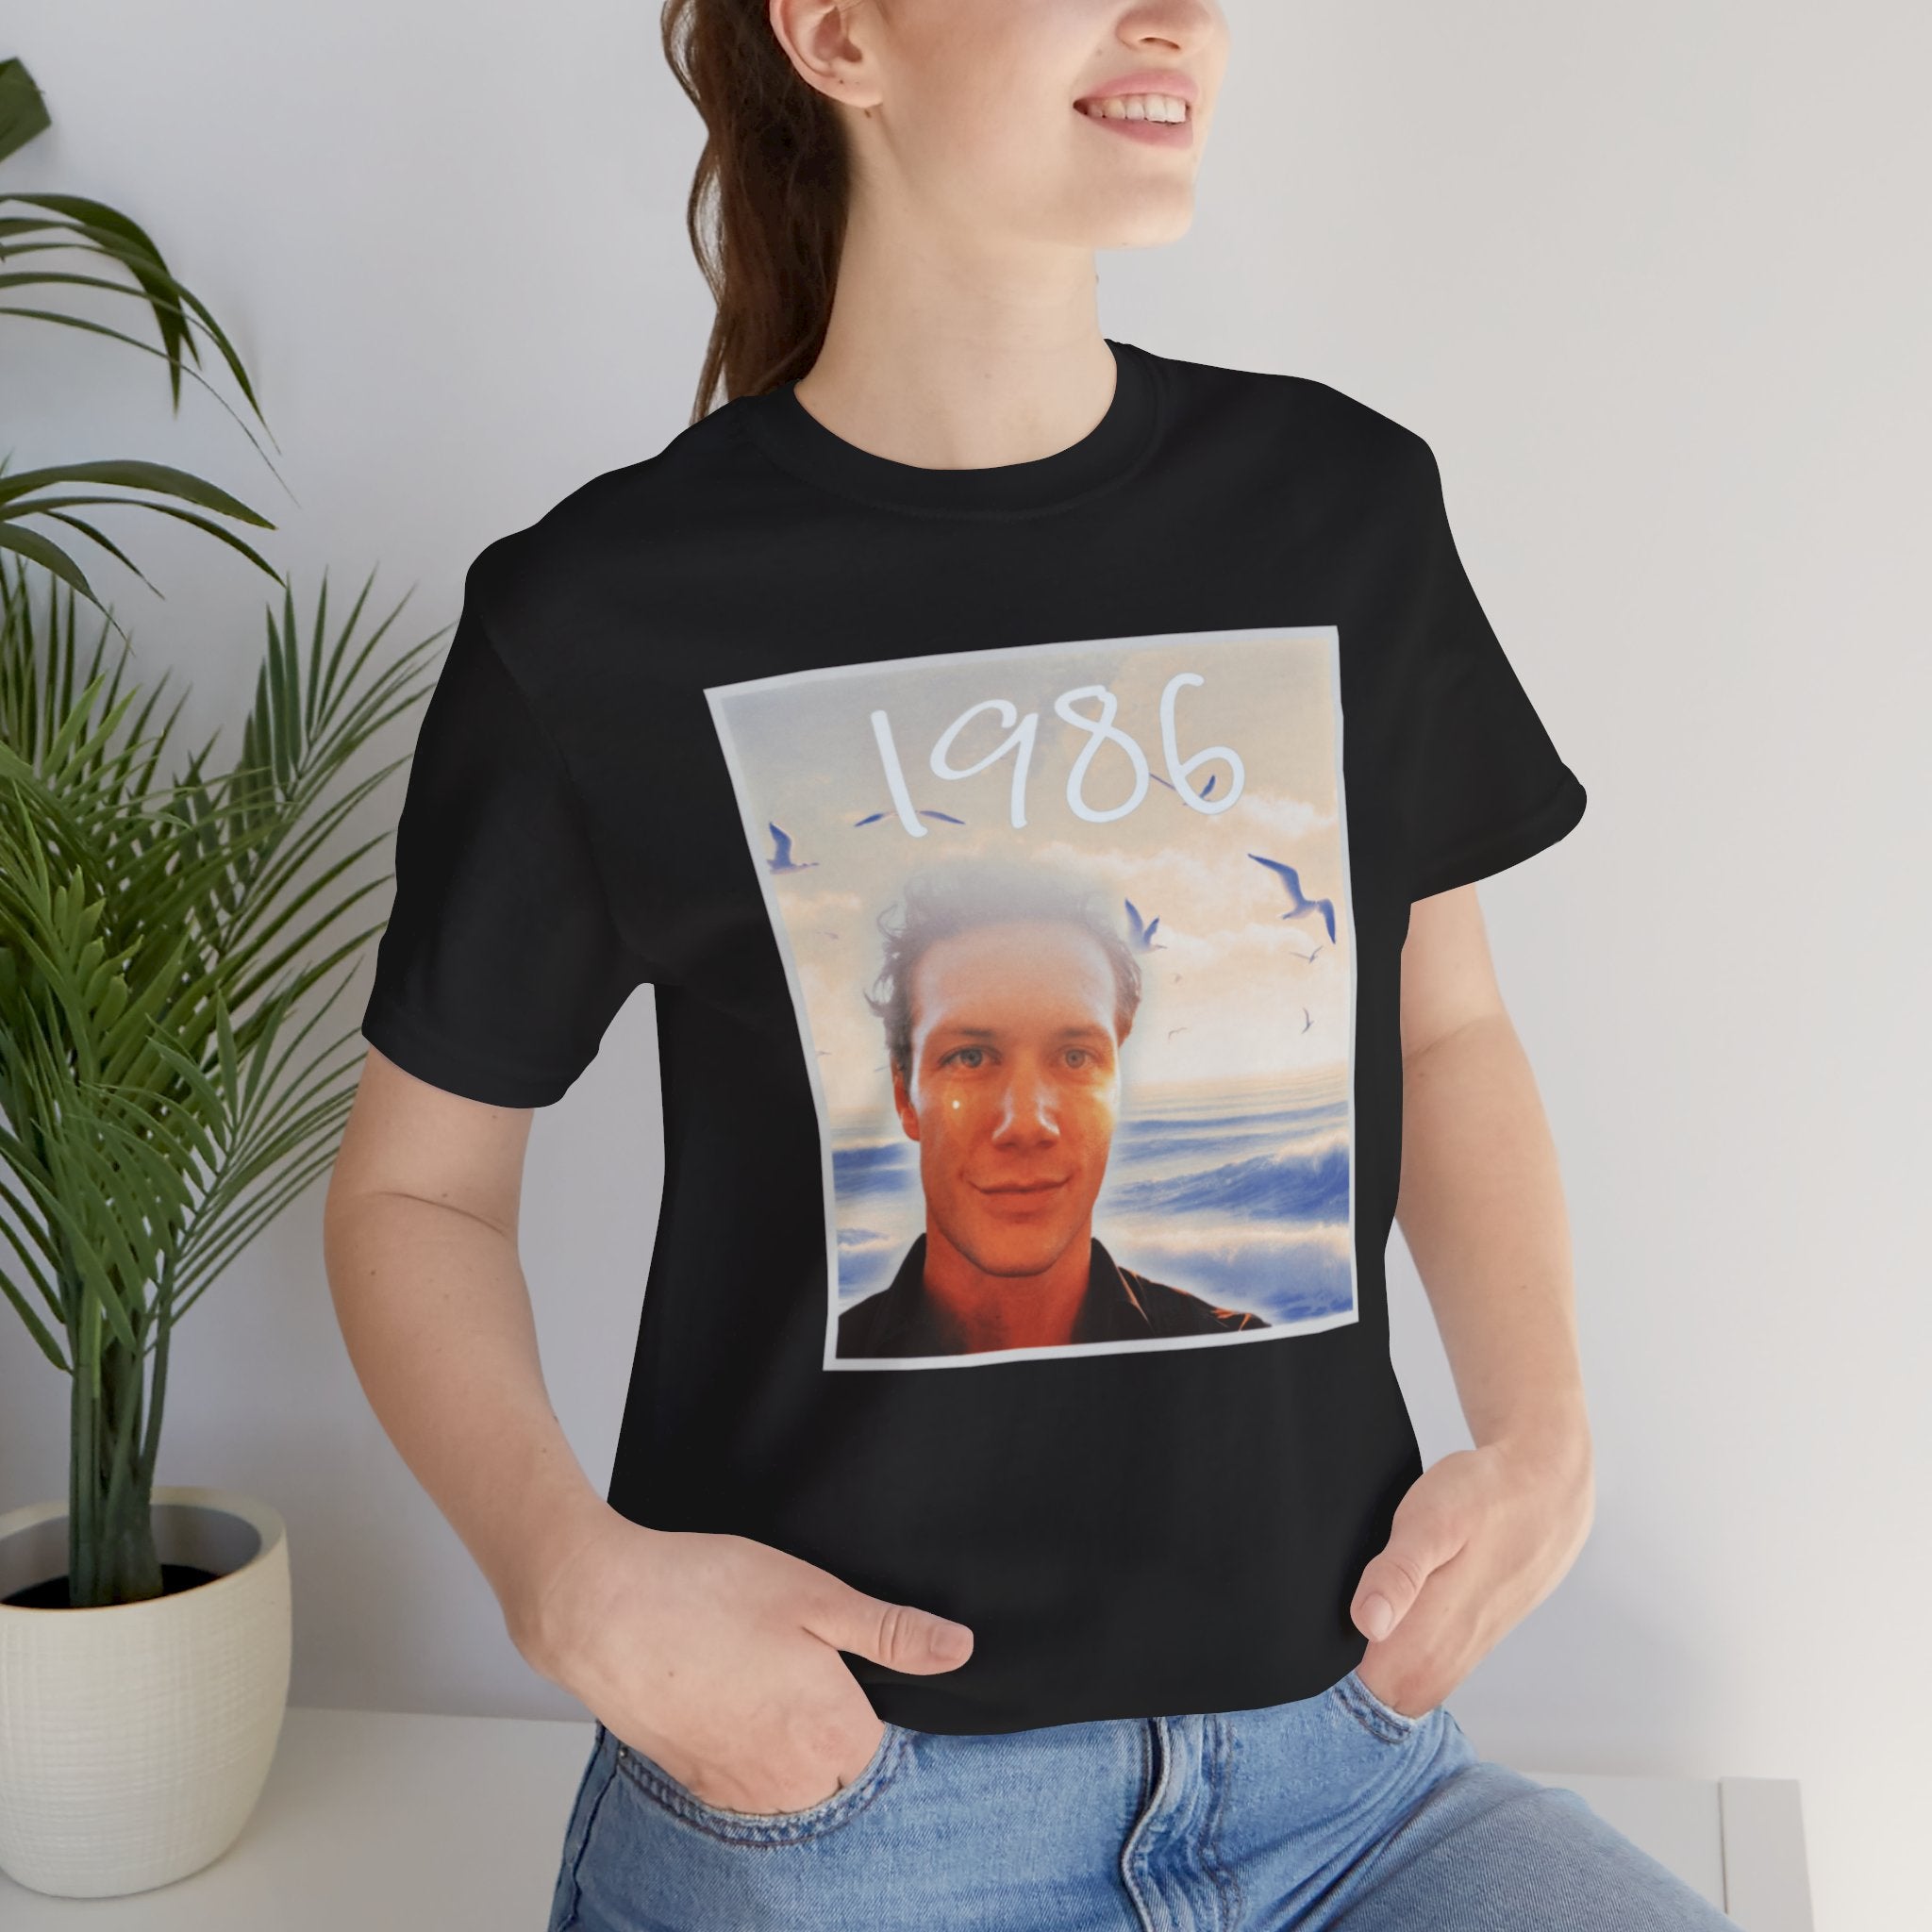 Justice for Johnny 1986 Unisex Jersey Short Sleeve Tee